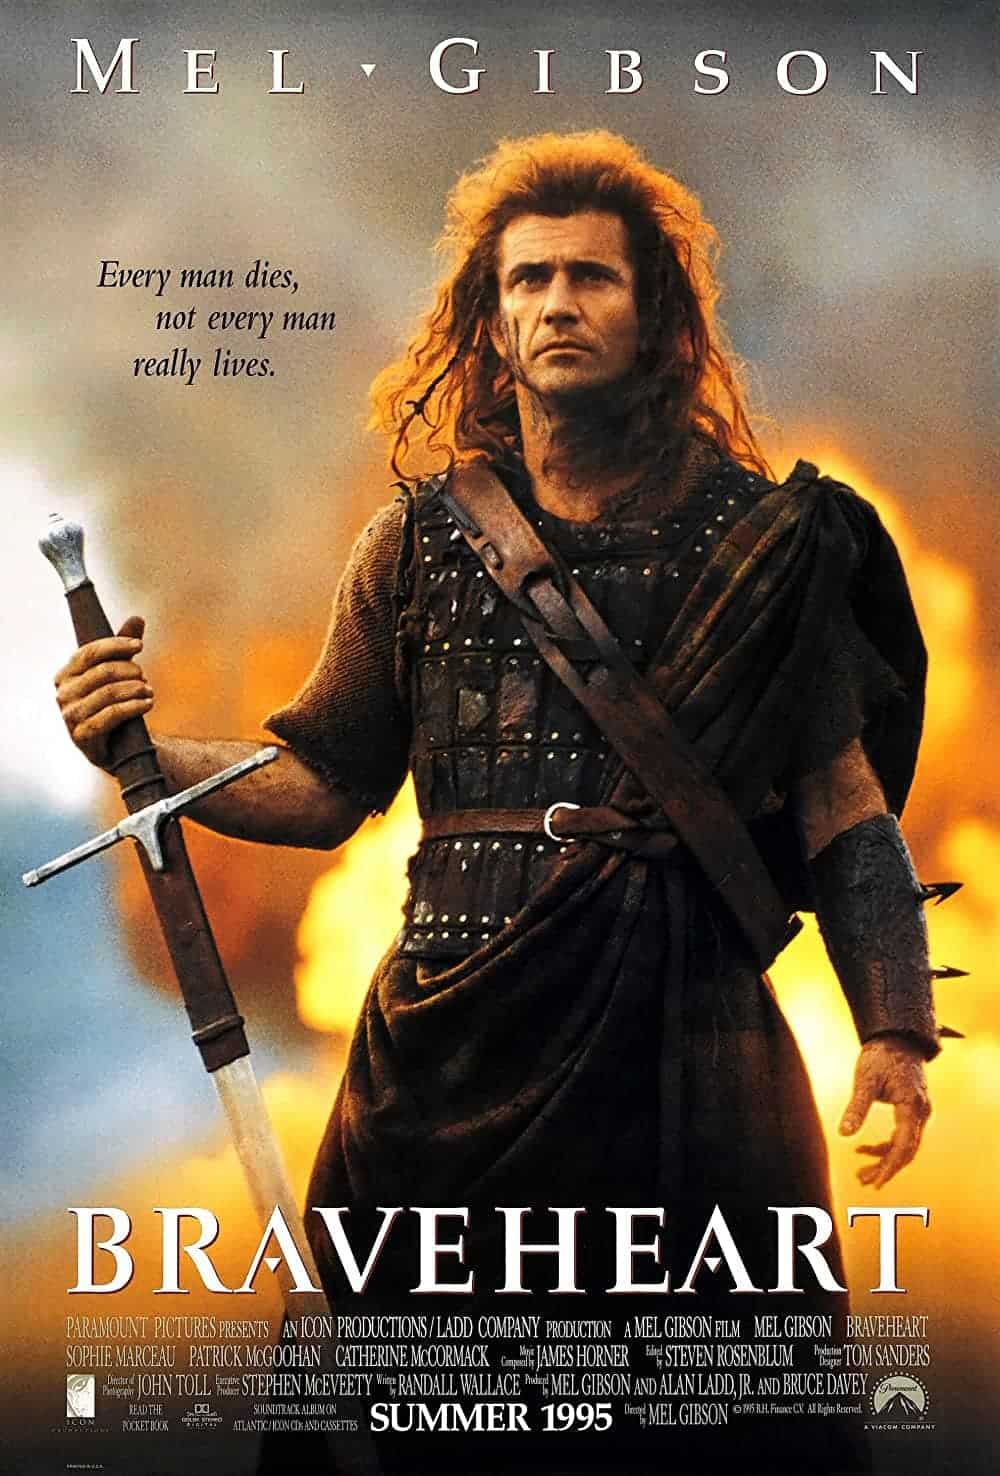 Braveheart (1995) Best Knight Movies to Add in Your Watchlist